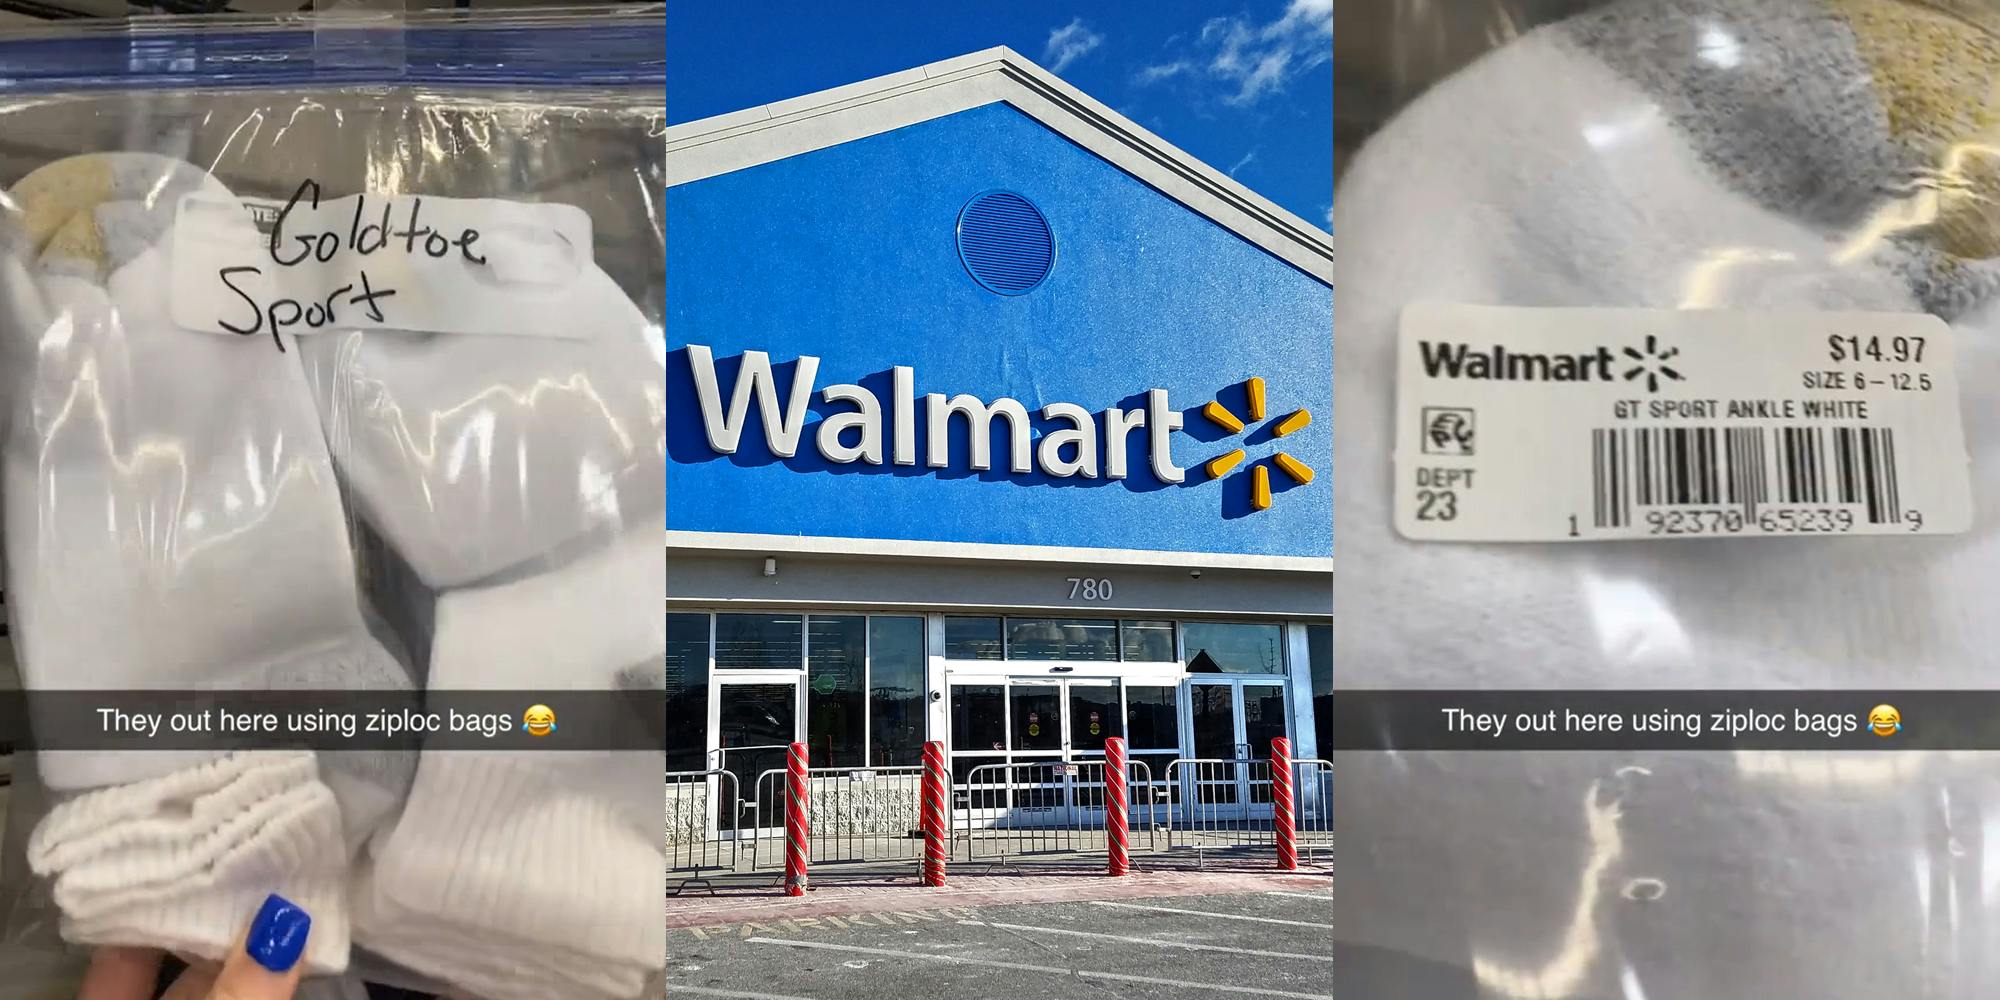 Walmart socks in ziploc bag hung on rack qith caption "They out here using ziploc bags" (l) Walmart building entrance with sign (c) Walmart socks in ziploc bag hung on rack qith caption "They out here using ziploc bags" (r)